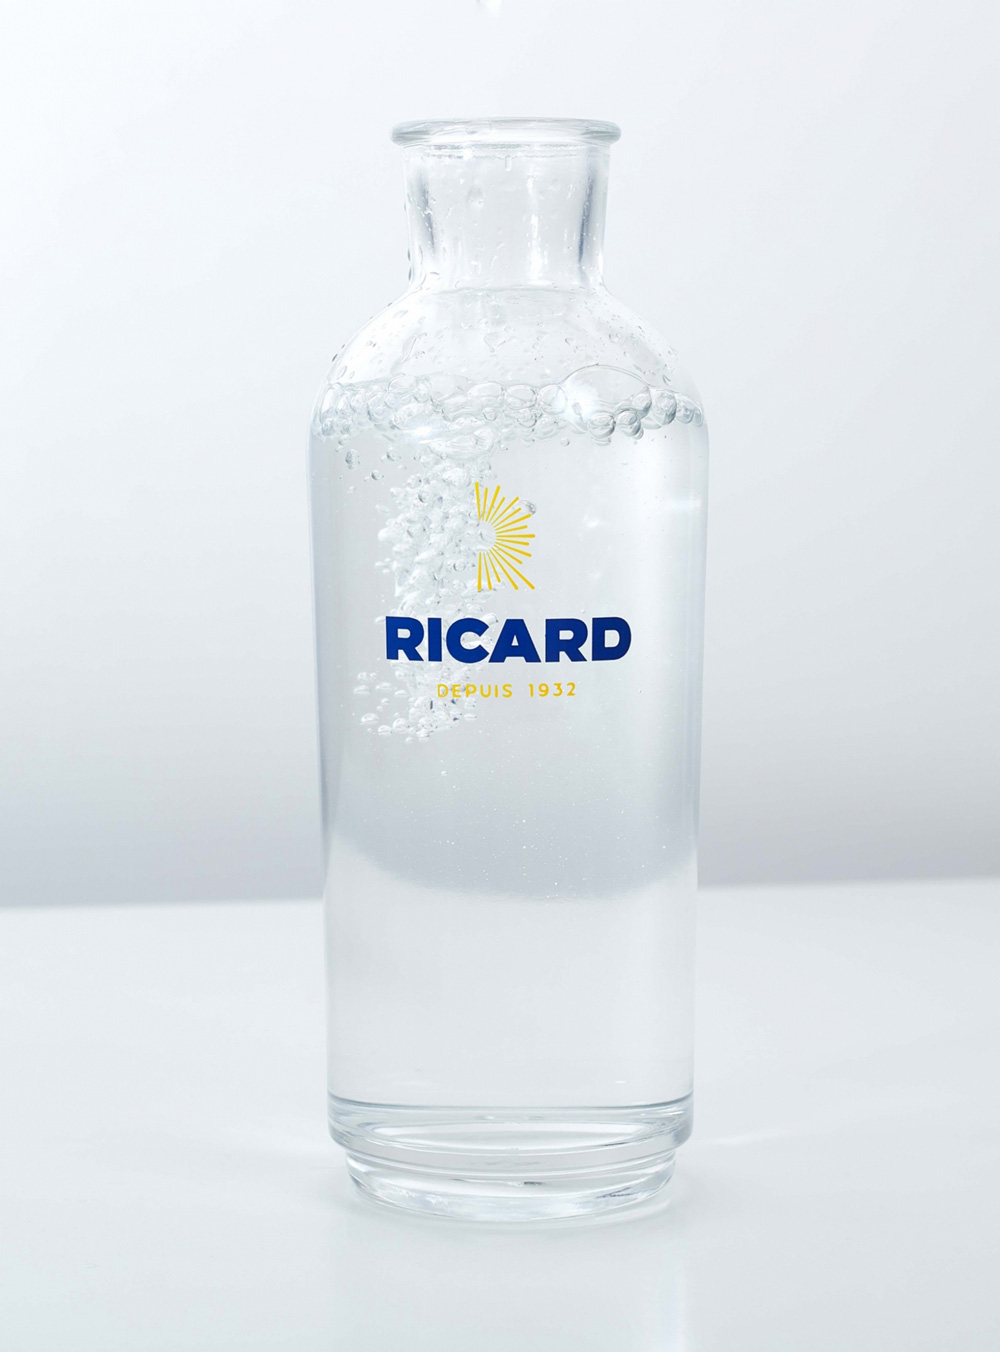 New Logo and Identity for Ricard by Yorgo&Co